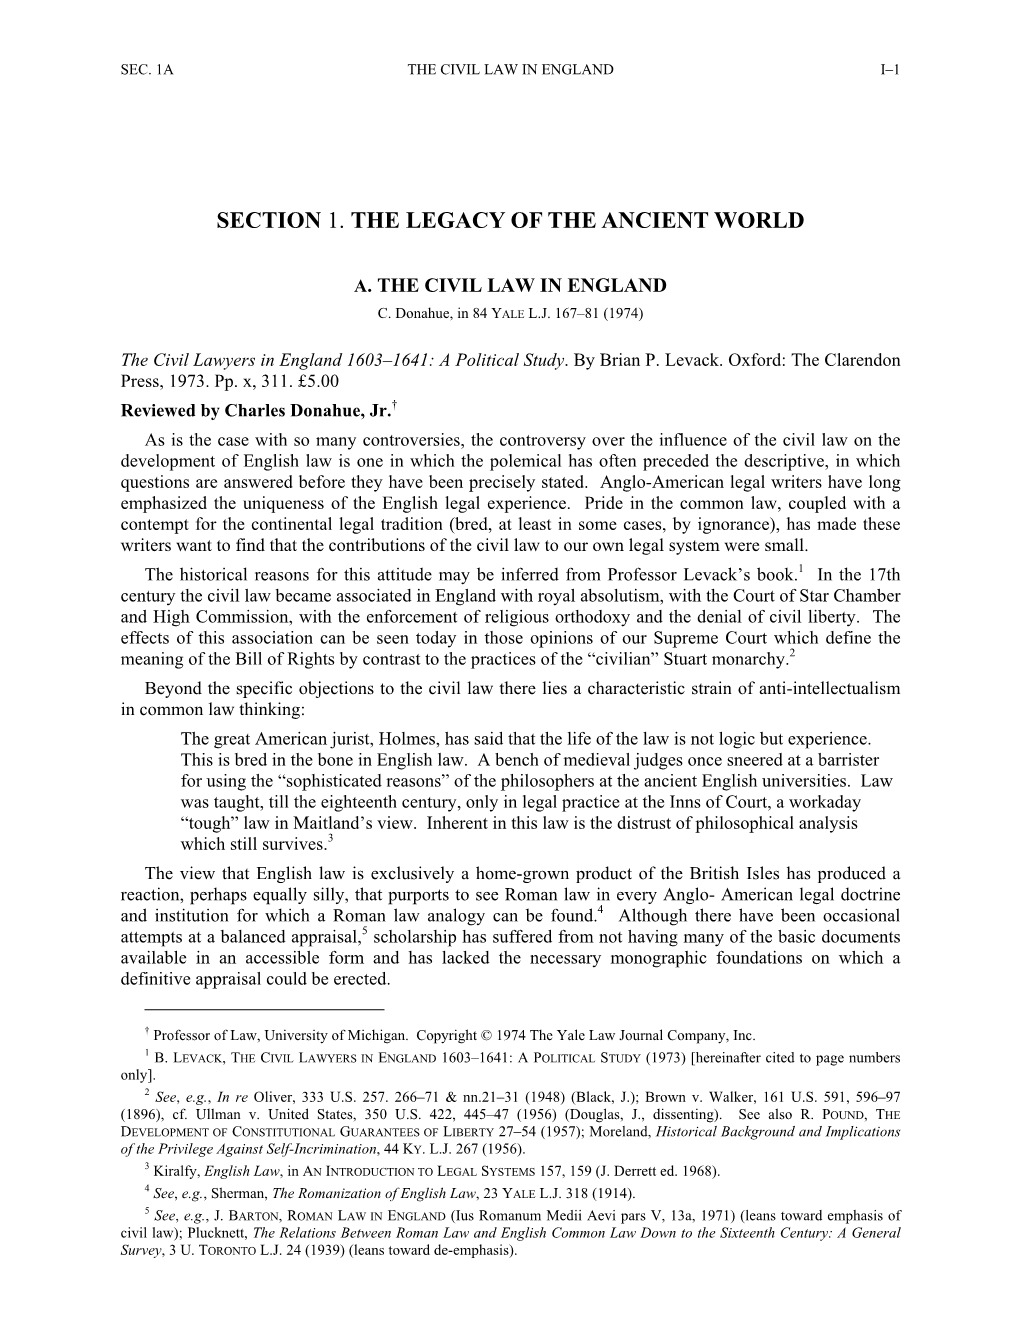 Section 1. the Legacy of the Ancient World